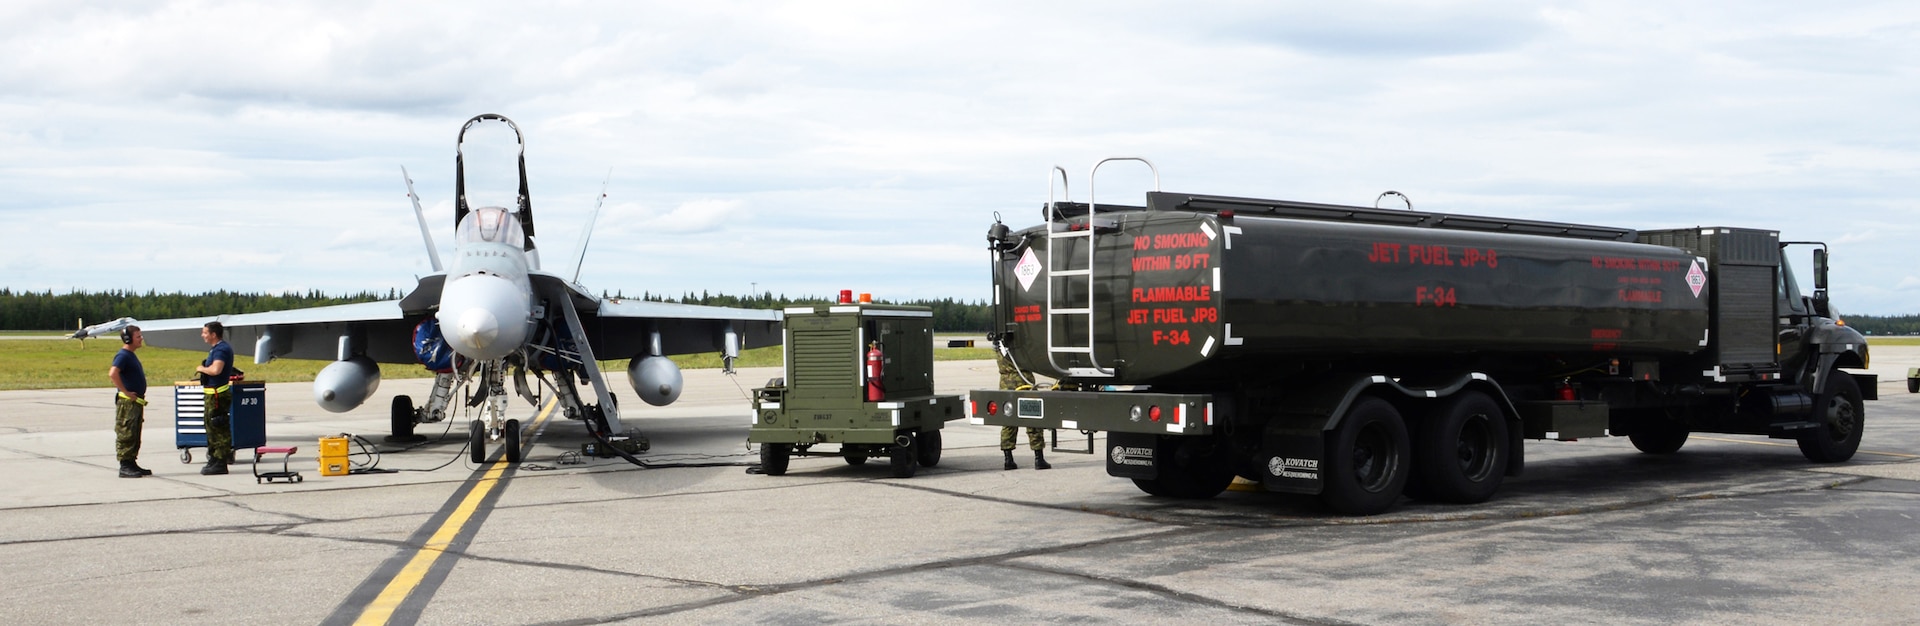 A Royal Canadian air force CF-18 Hornet sits on the Eielson Air Force Base, Alaska, flight line while a U.S. Air Force fuel truck prepares to refuel the aircraft during an exercise in Alaska. The exercise provides an optimal training environment in the Indo-Asia-Pacific Region and focuses on improving ground, space, and cyberspace combat readiness and interoperability for U.S. and international forces.